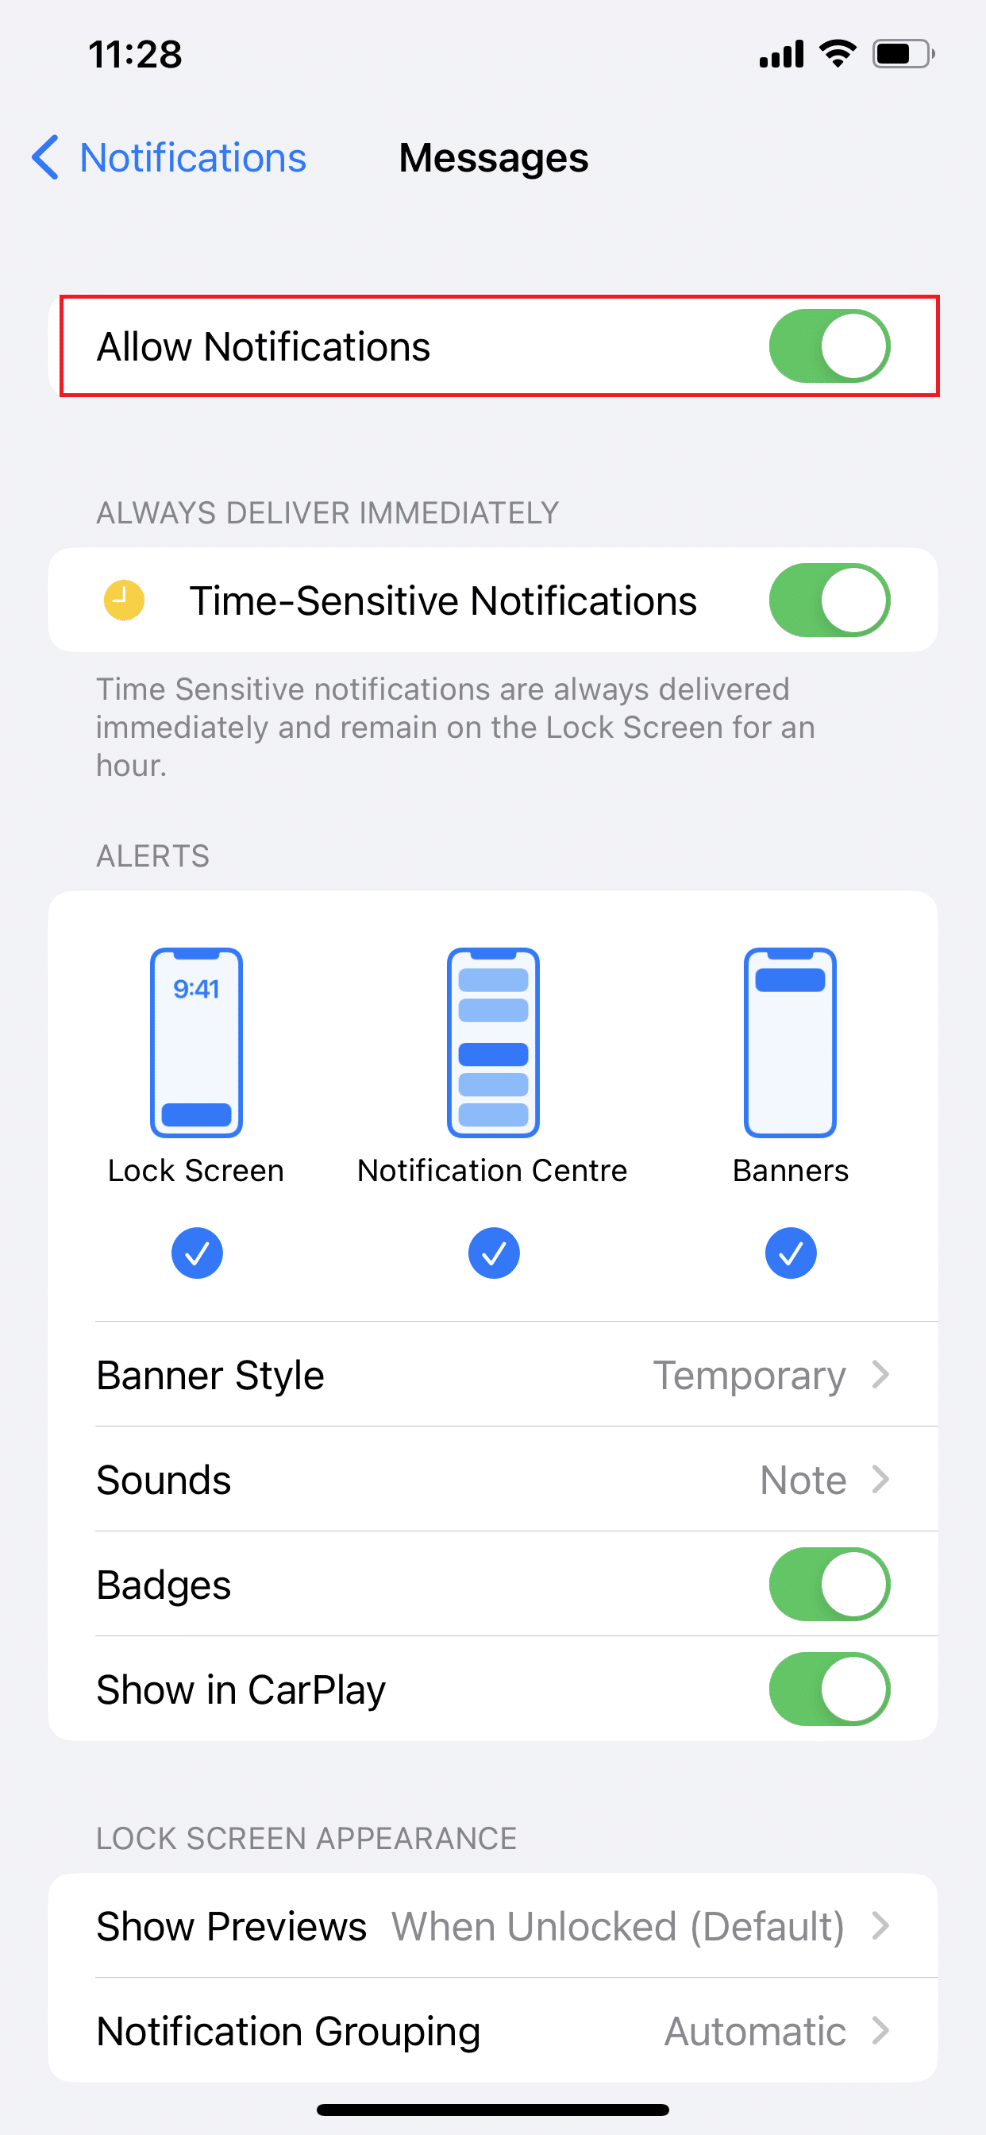 Verify that Allow Notifications is set to green | Why are My Notifications Not Making Sound on iPhone